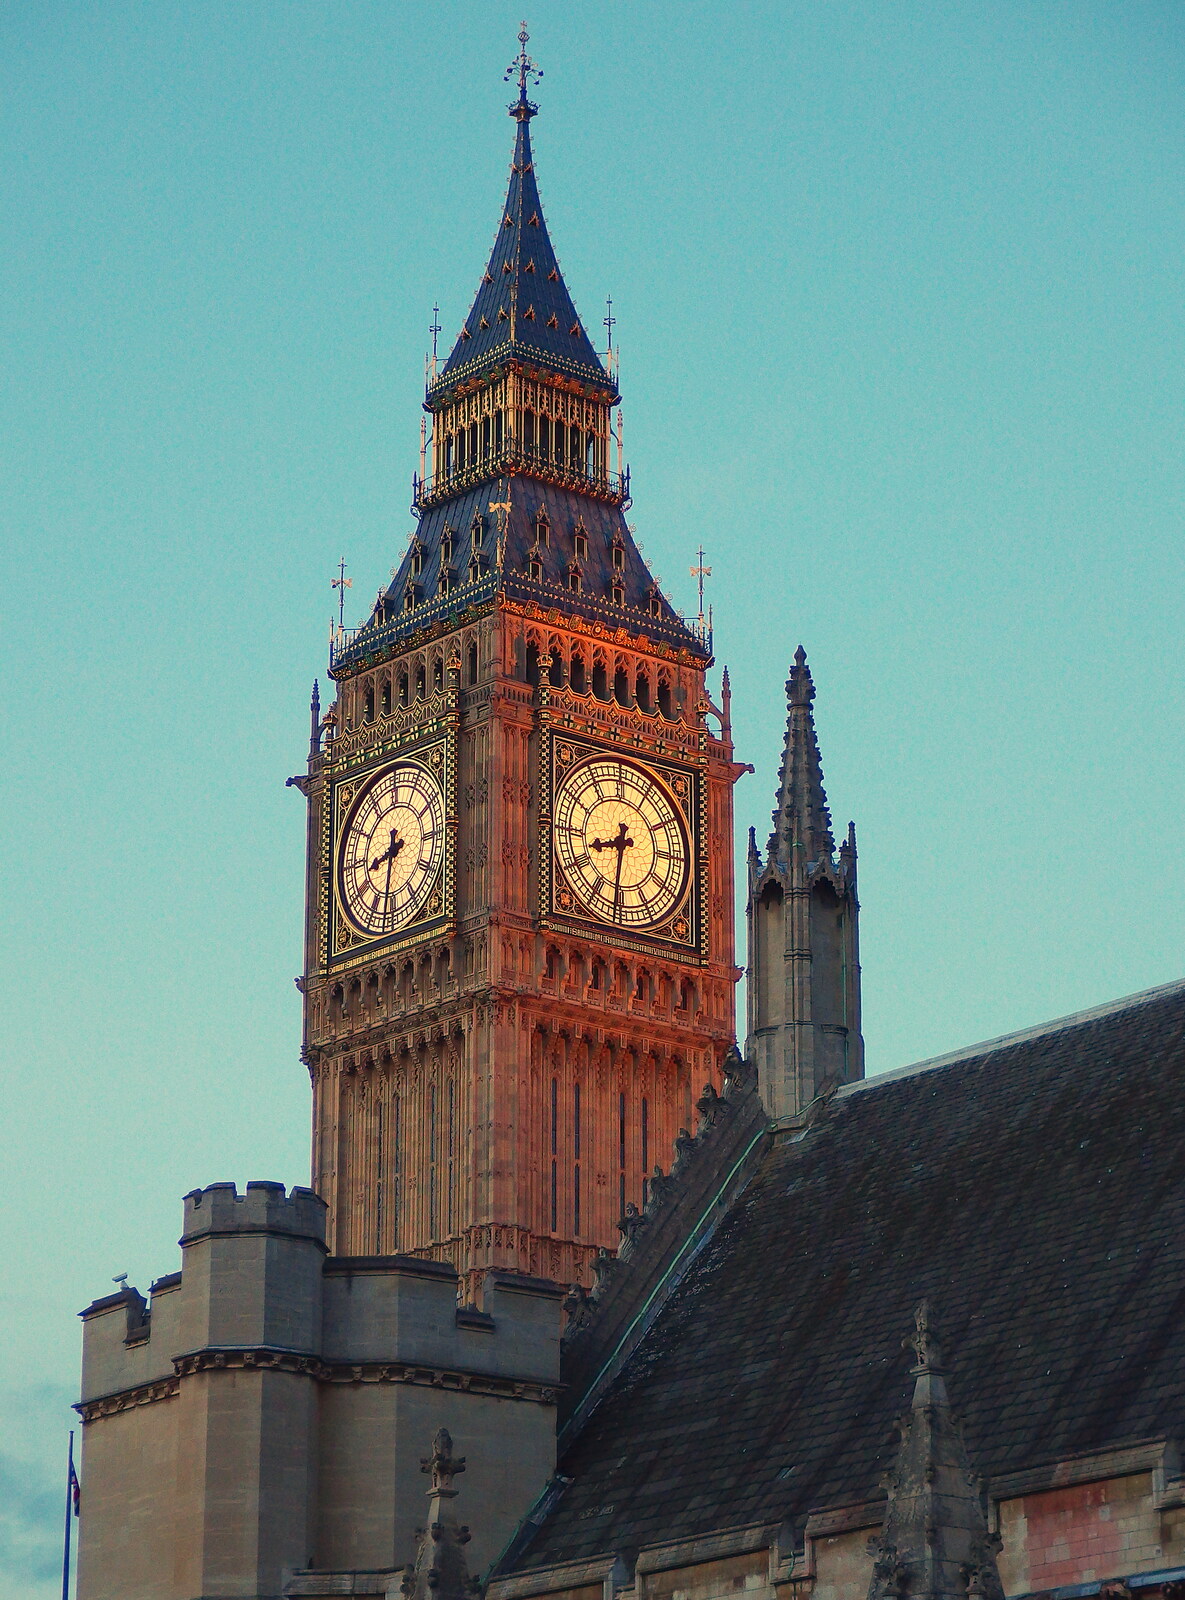 The Elizabeth Tower, a.k.a 'Big Ben' from SwiftKey Innovation Day and a Walk around Westminster, London - 16th August 2013